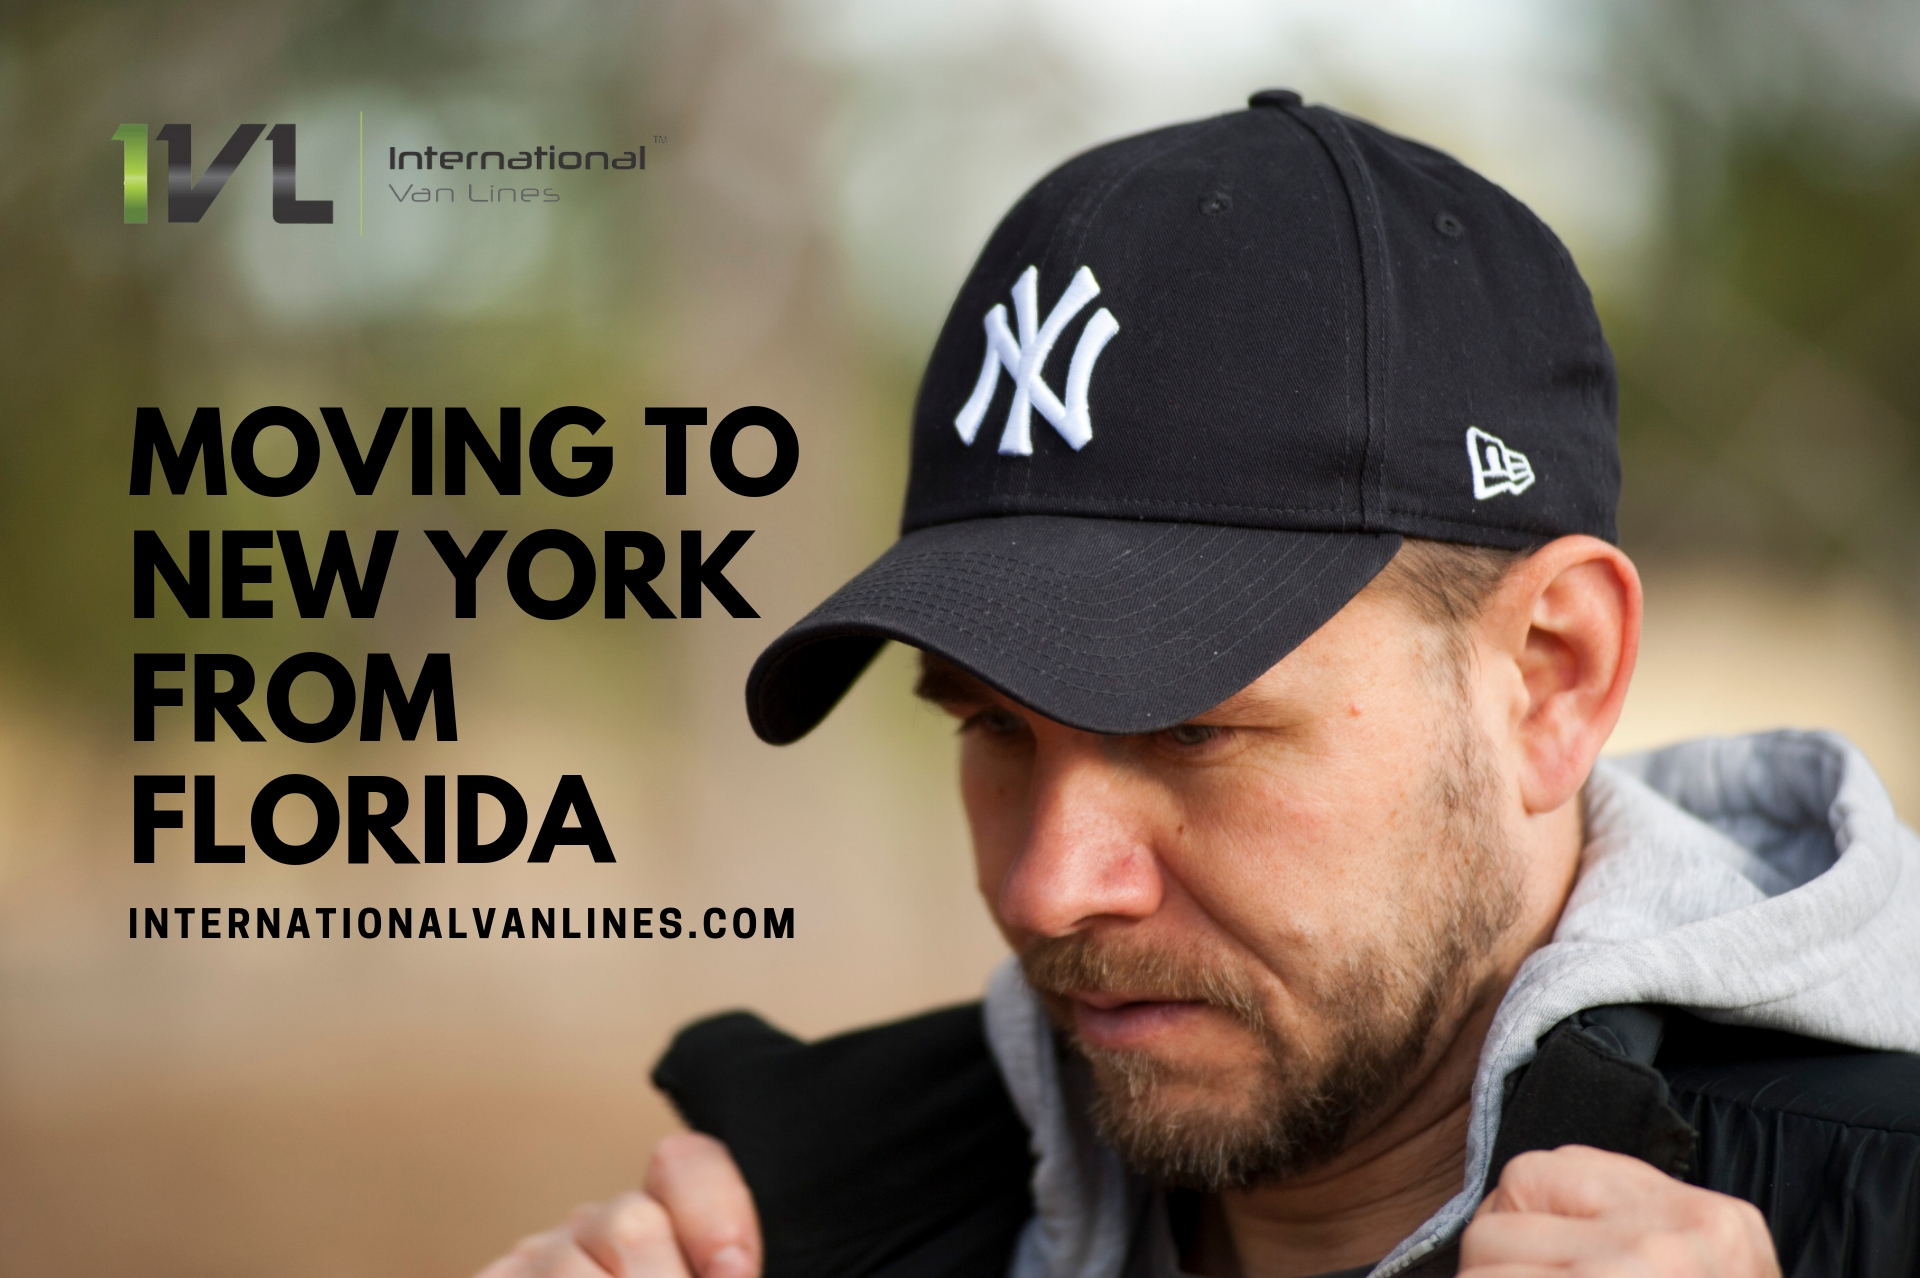 Moving to New York from Florida